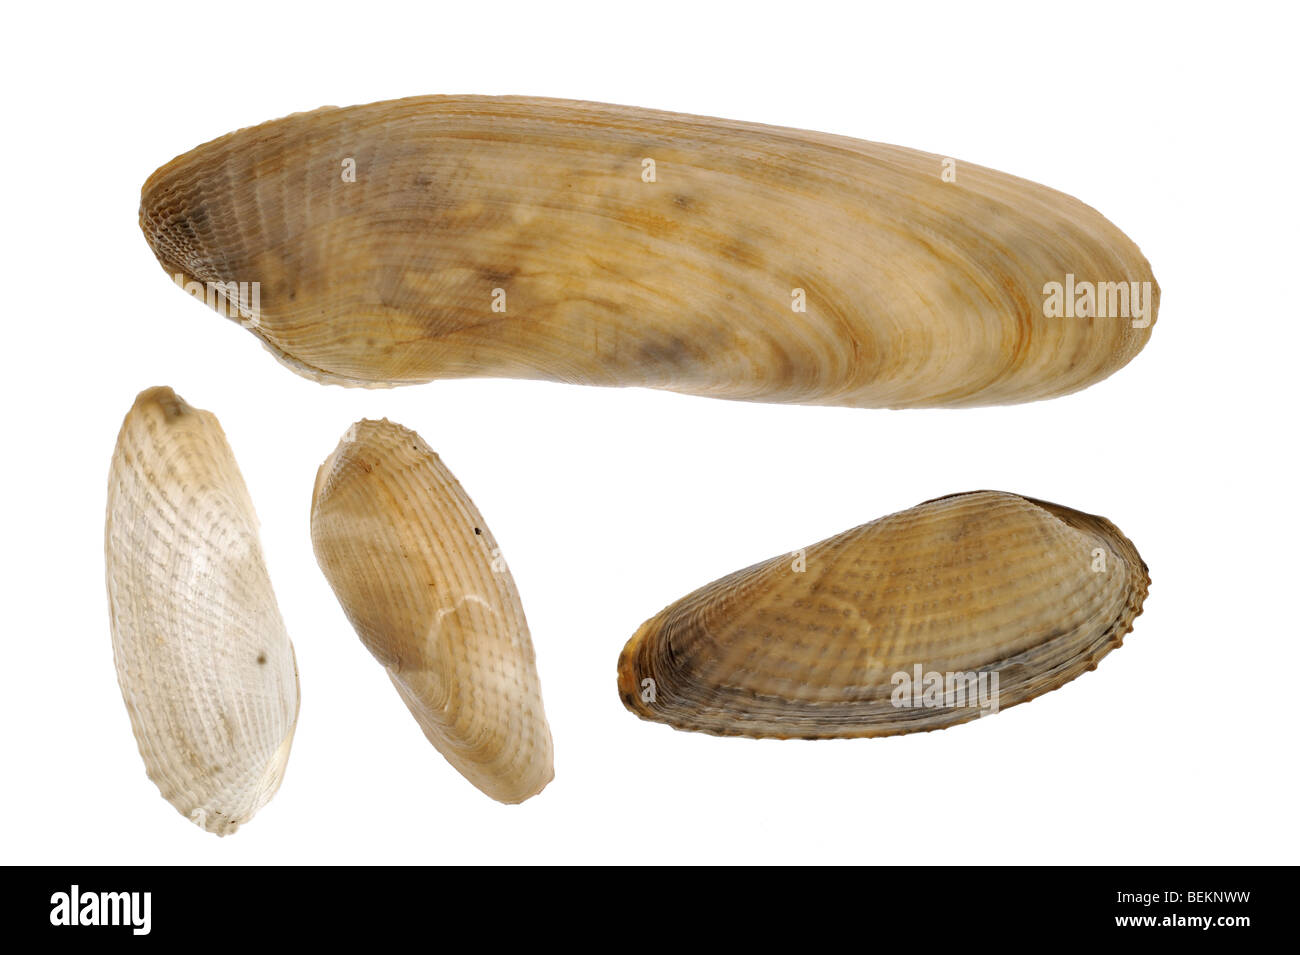 Pholadidae with White piddock (Barnea candida) and Common piddock (Pholas dactylus), Normandy, France Stock Photo